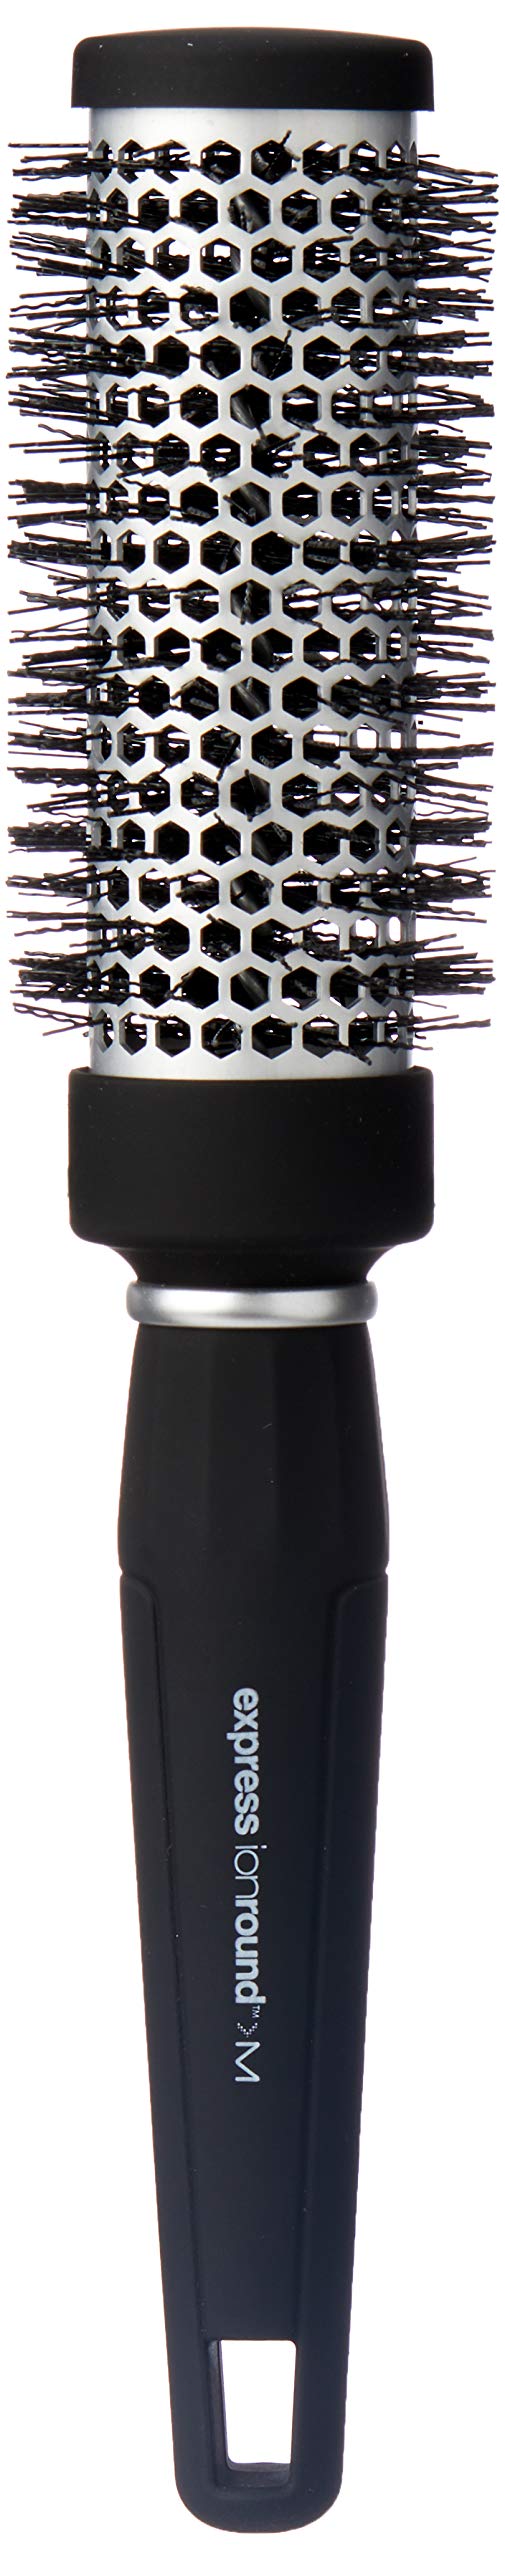 Paul Mitchell Pro Tools Express Ion Aluminum Round Brush, For Blow-Drying All Hair Types